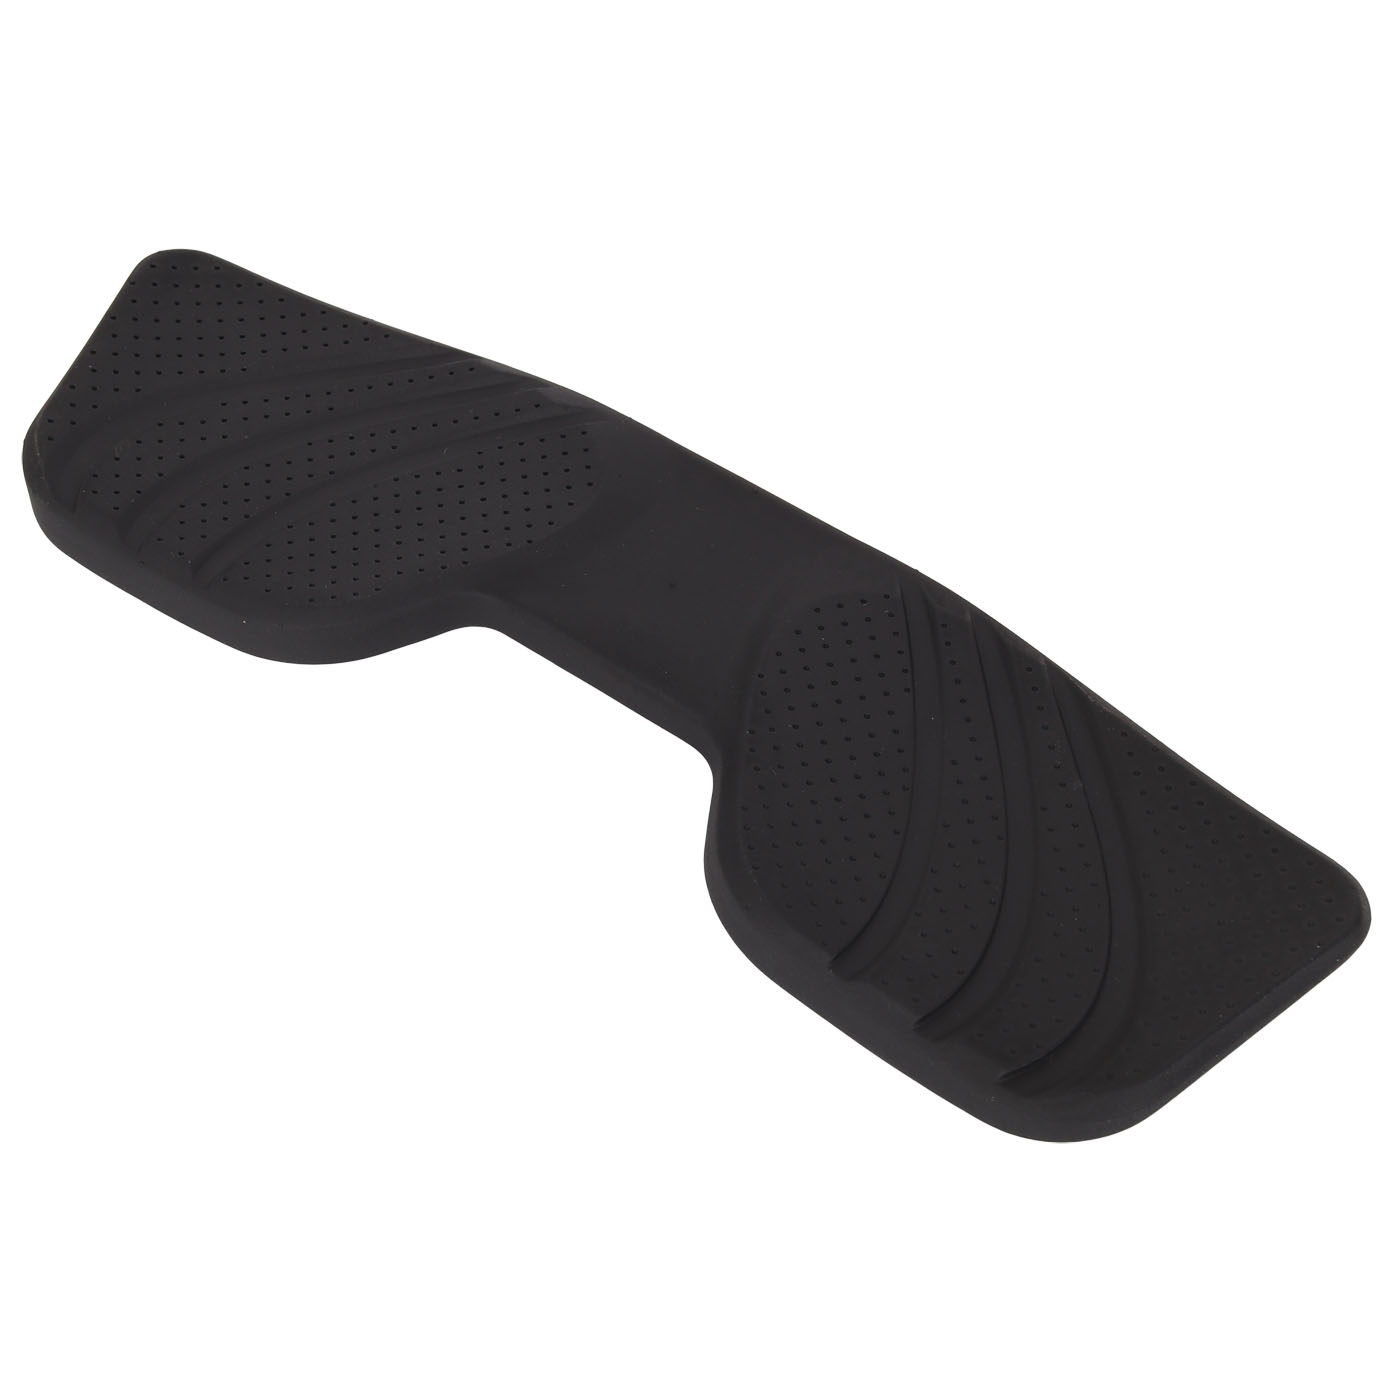 Productfoto van Control Tech Armrest Pad for Sirocco Clip-On Aerobars